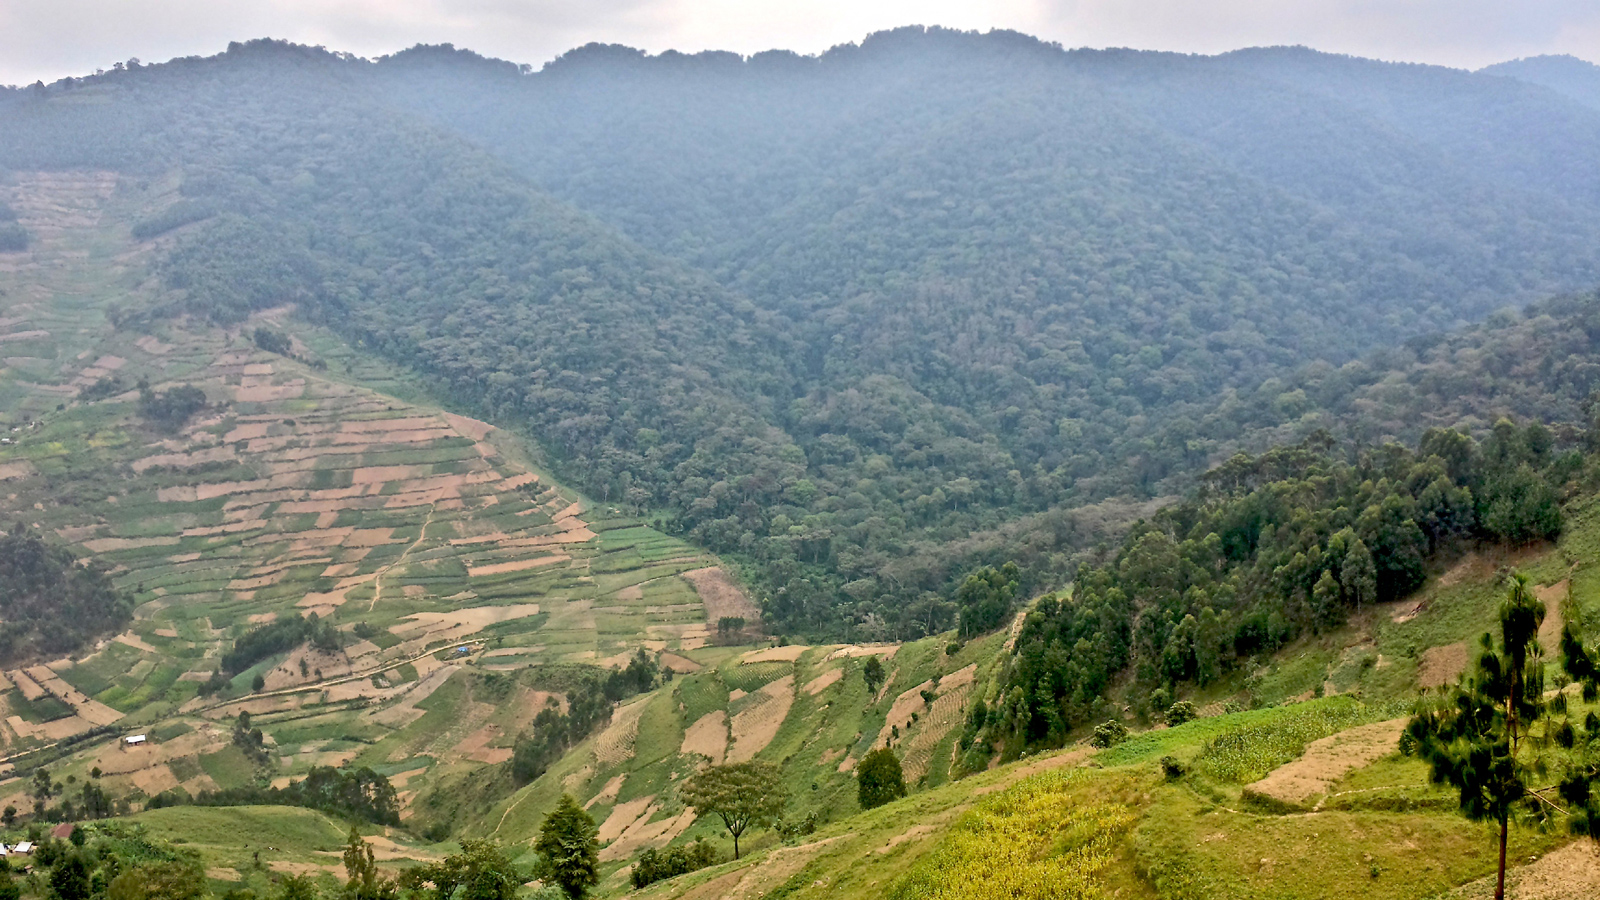 The border between Bwindi Impenetrable National Park and community land